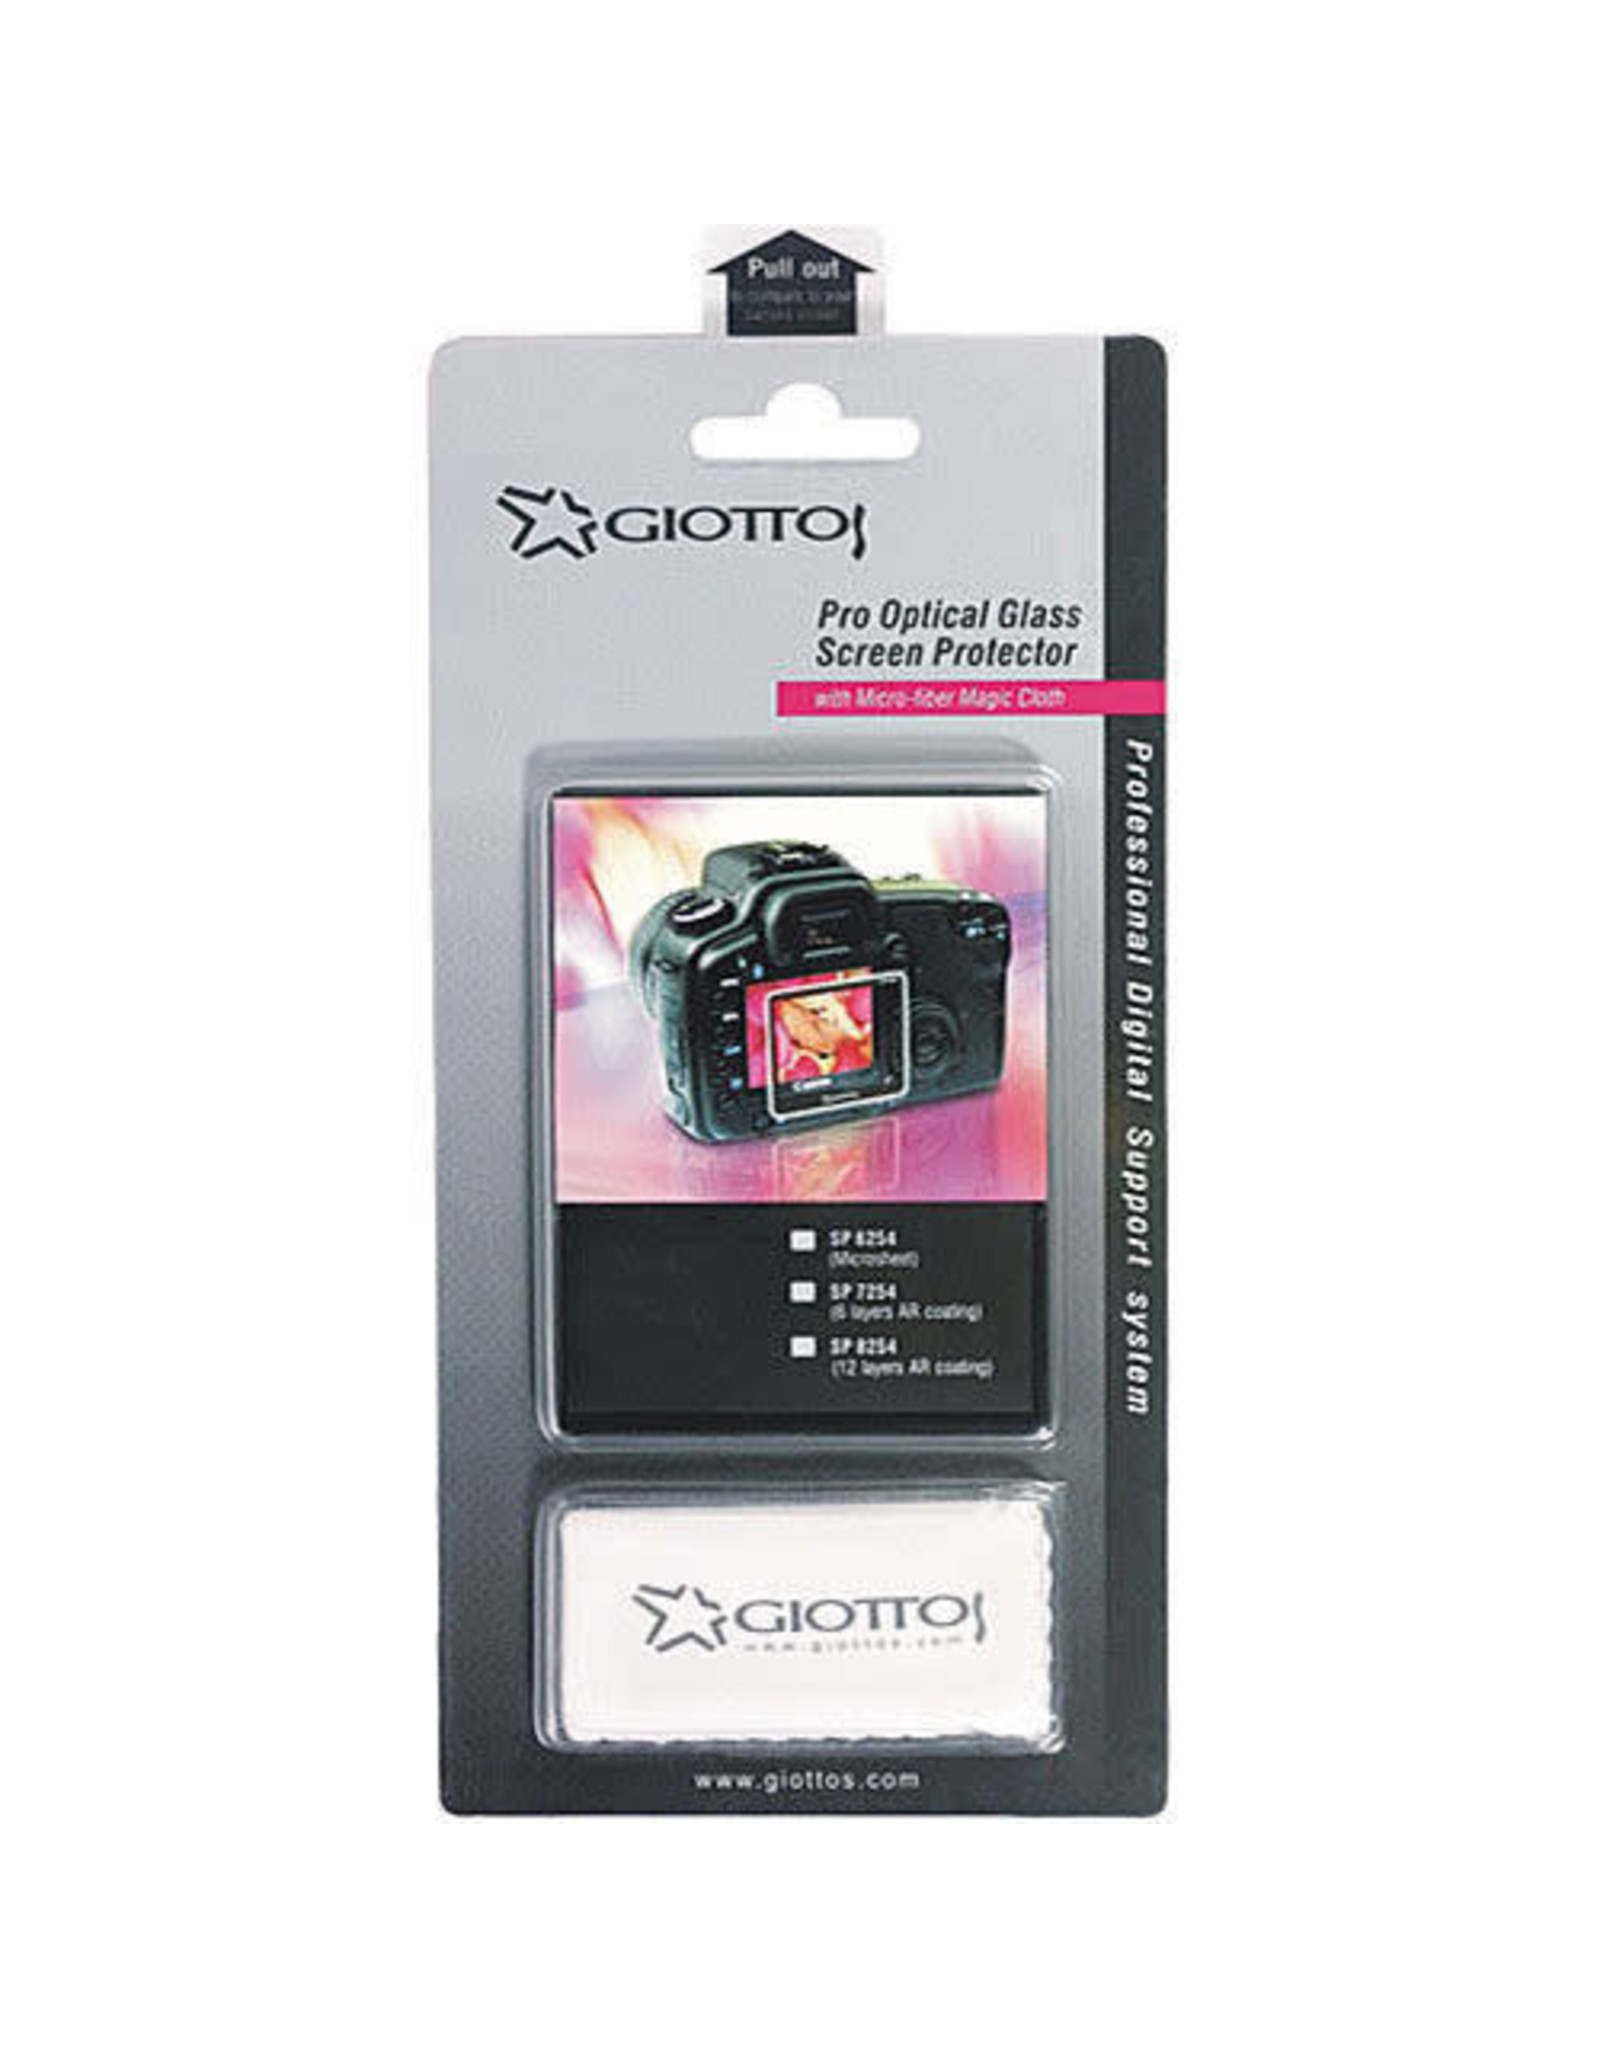 Giottos Pro M-C Schott Glass LCD Protector for Nikon D50